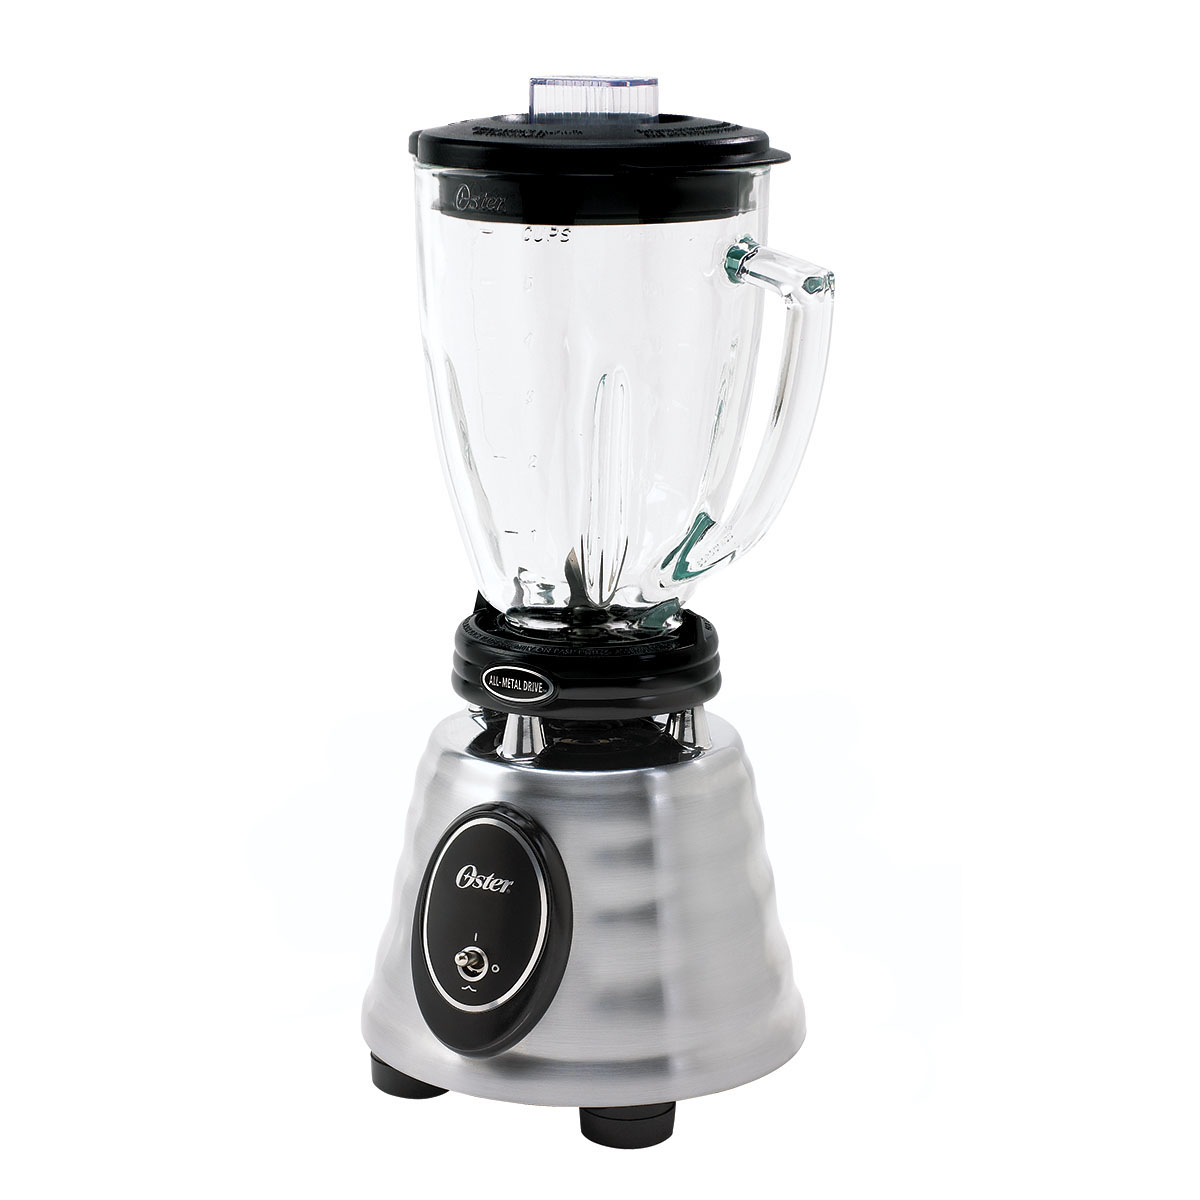 Oster® Classic Series Heritage Blender with 6-Cup Glass Jar 